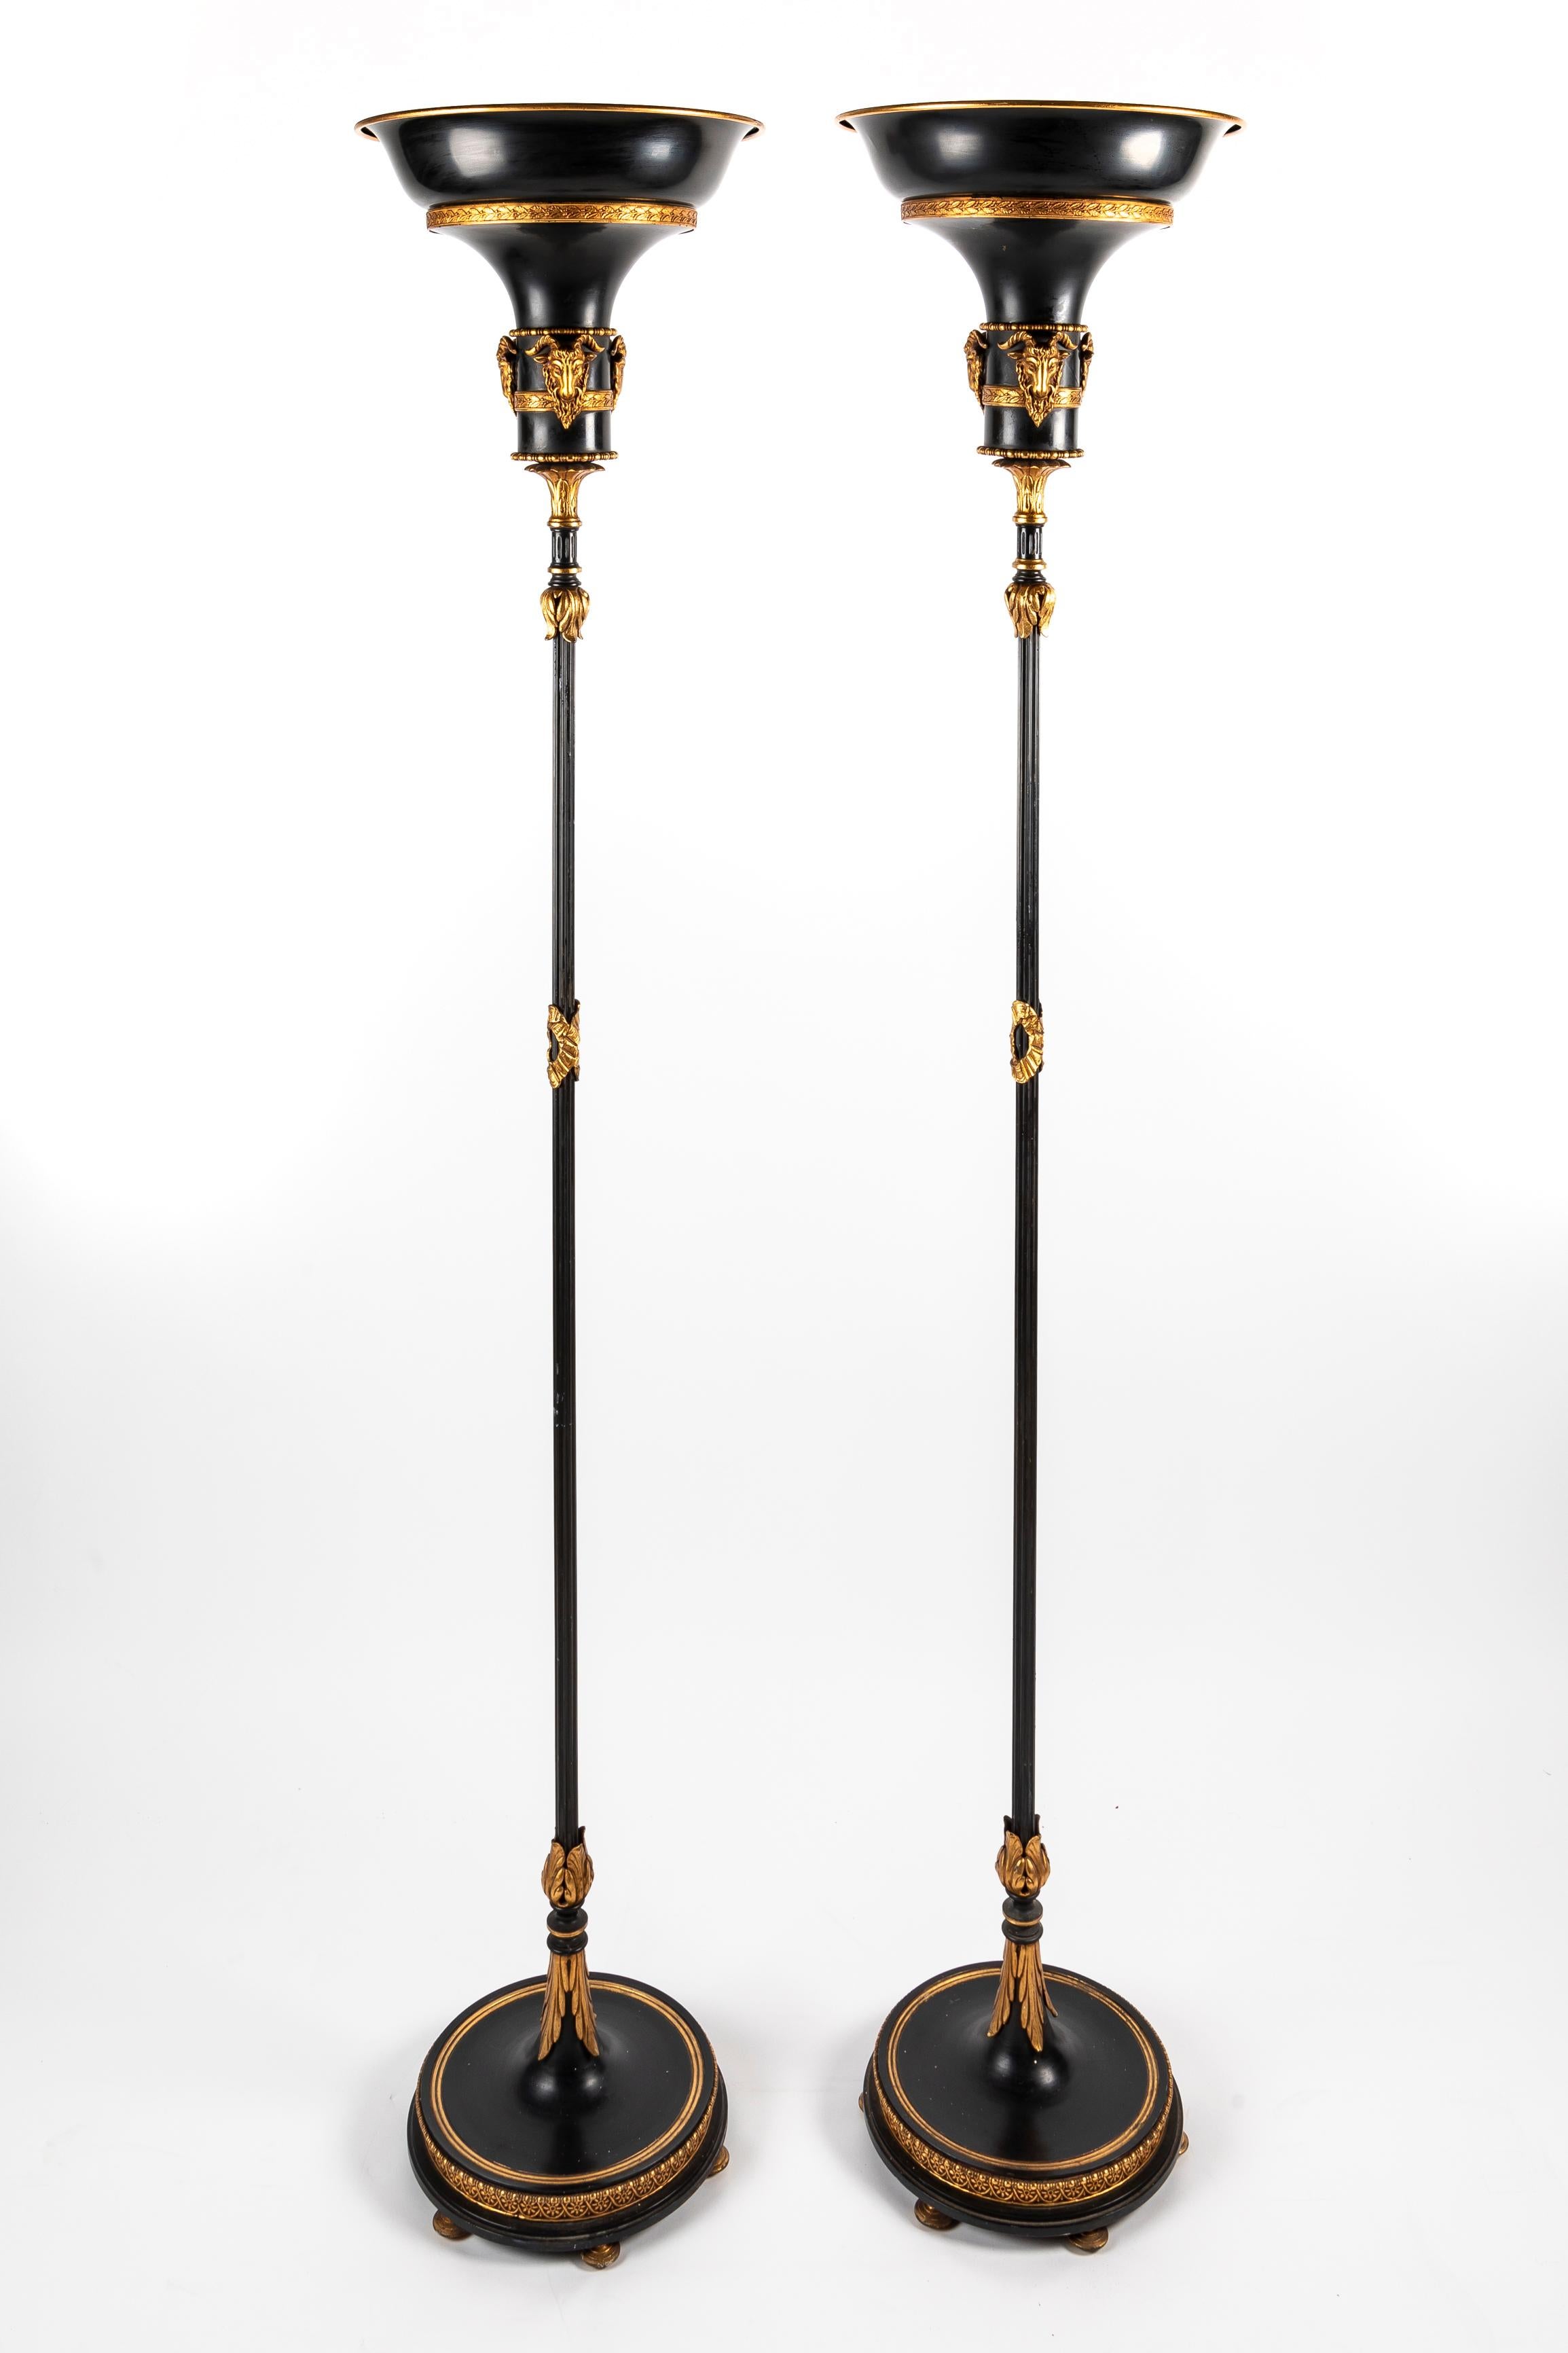 A Pair of unique tall Hollywood Regency French Patinated bronze and gilt bronze circular form floor lamps of great detail embellished with neoclassical motifs and further adorned with gilt bronze figural masks. 